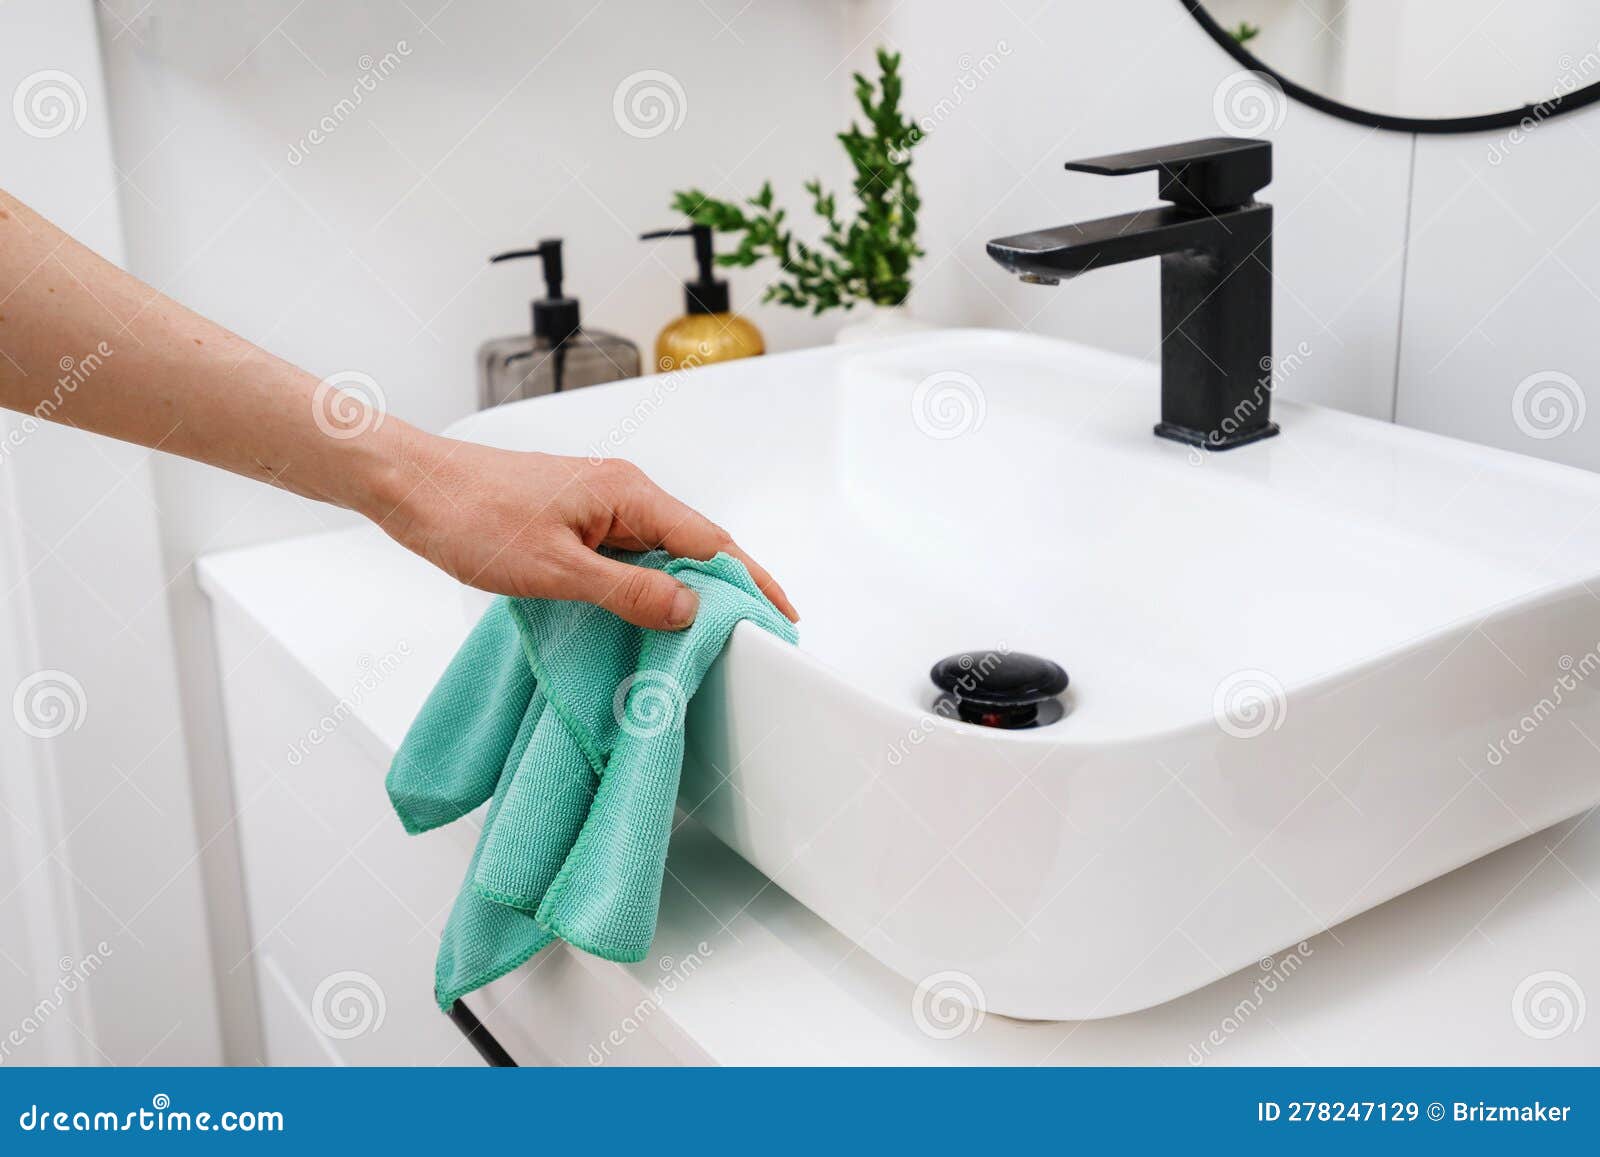 woman cleaning white washbowl with a black tap in bathroom